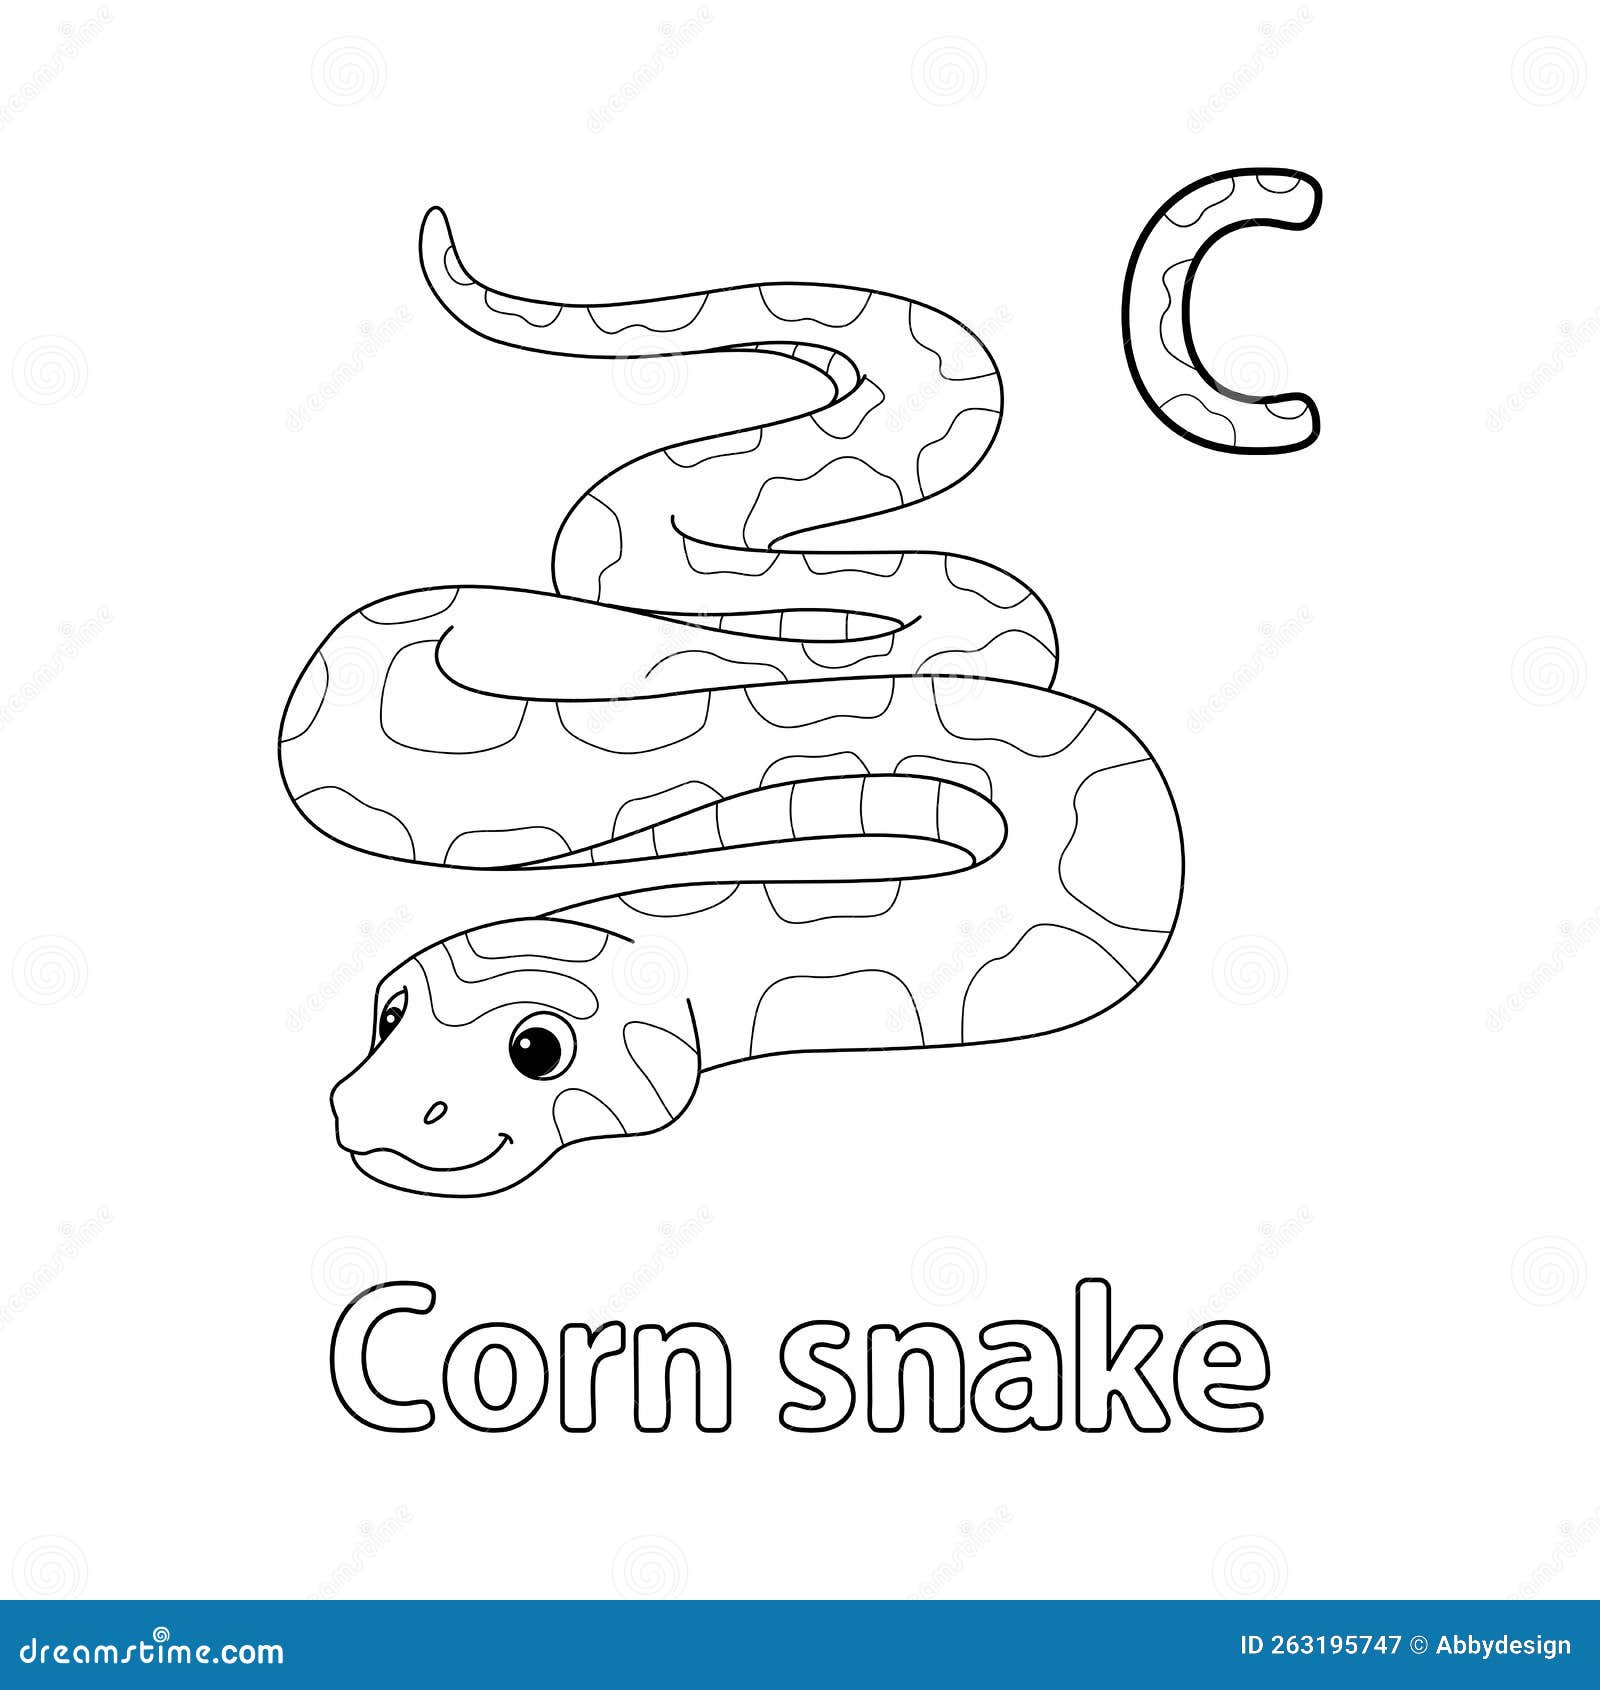 Snake coloring stock illustrations vectors clipart